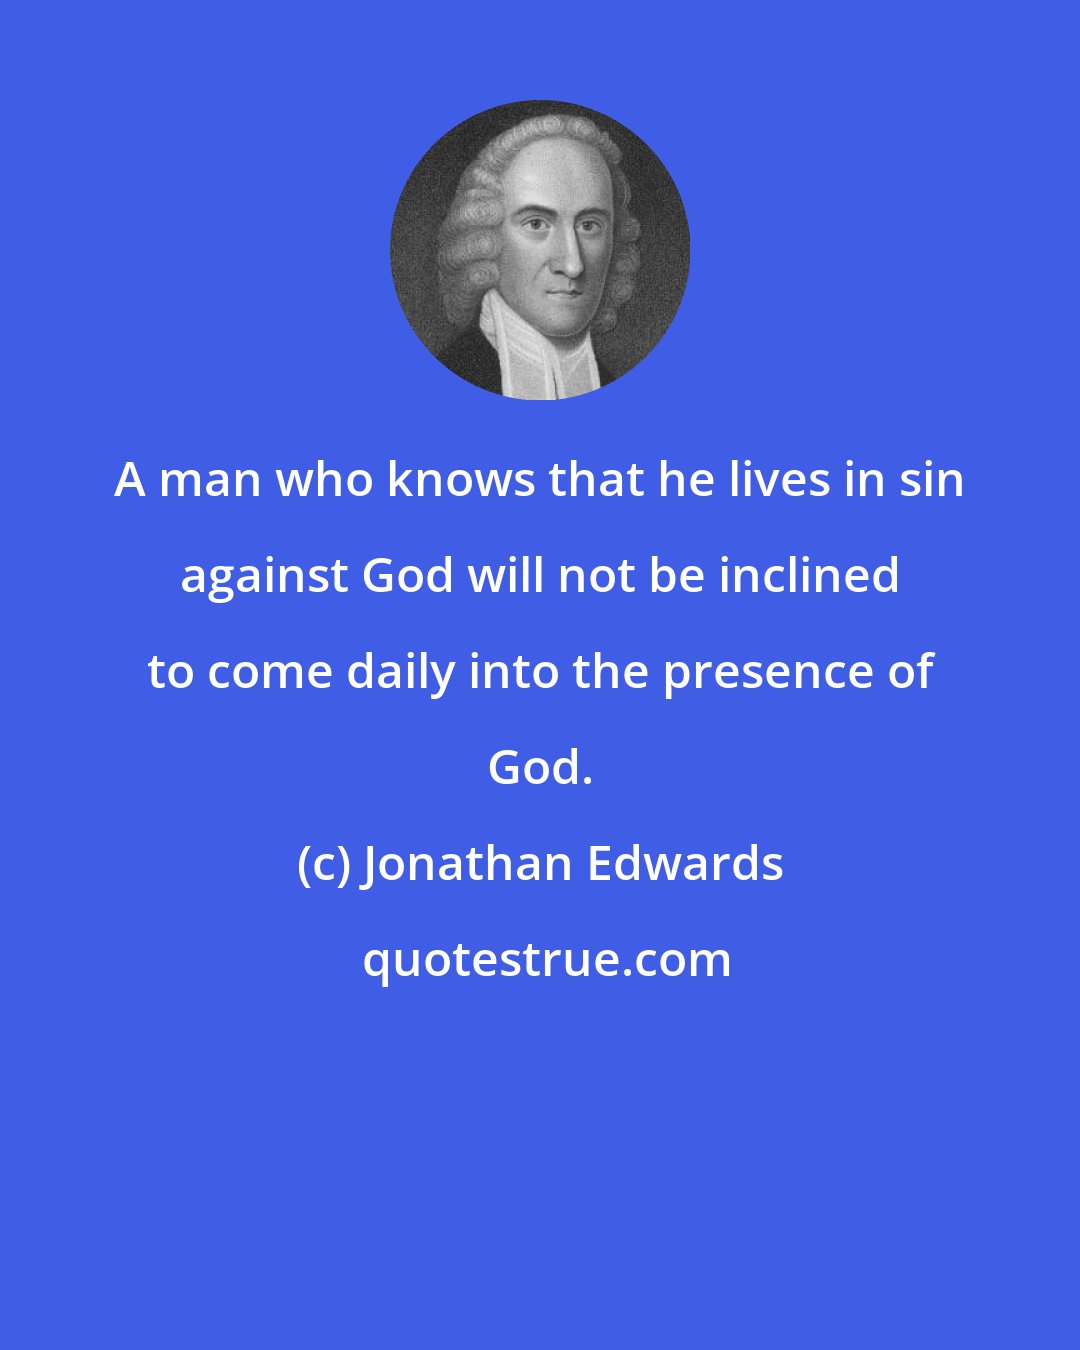 Jonathan Edwards: A man who knows that he lives in sin against God will not be inclined to come daily into the presence of God.